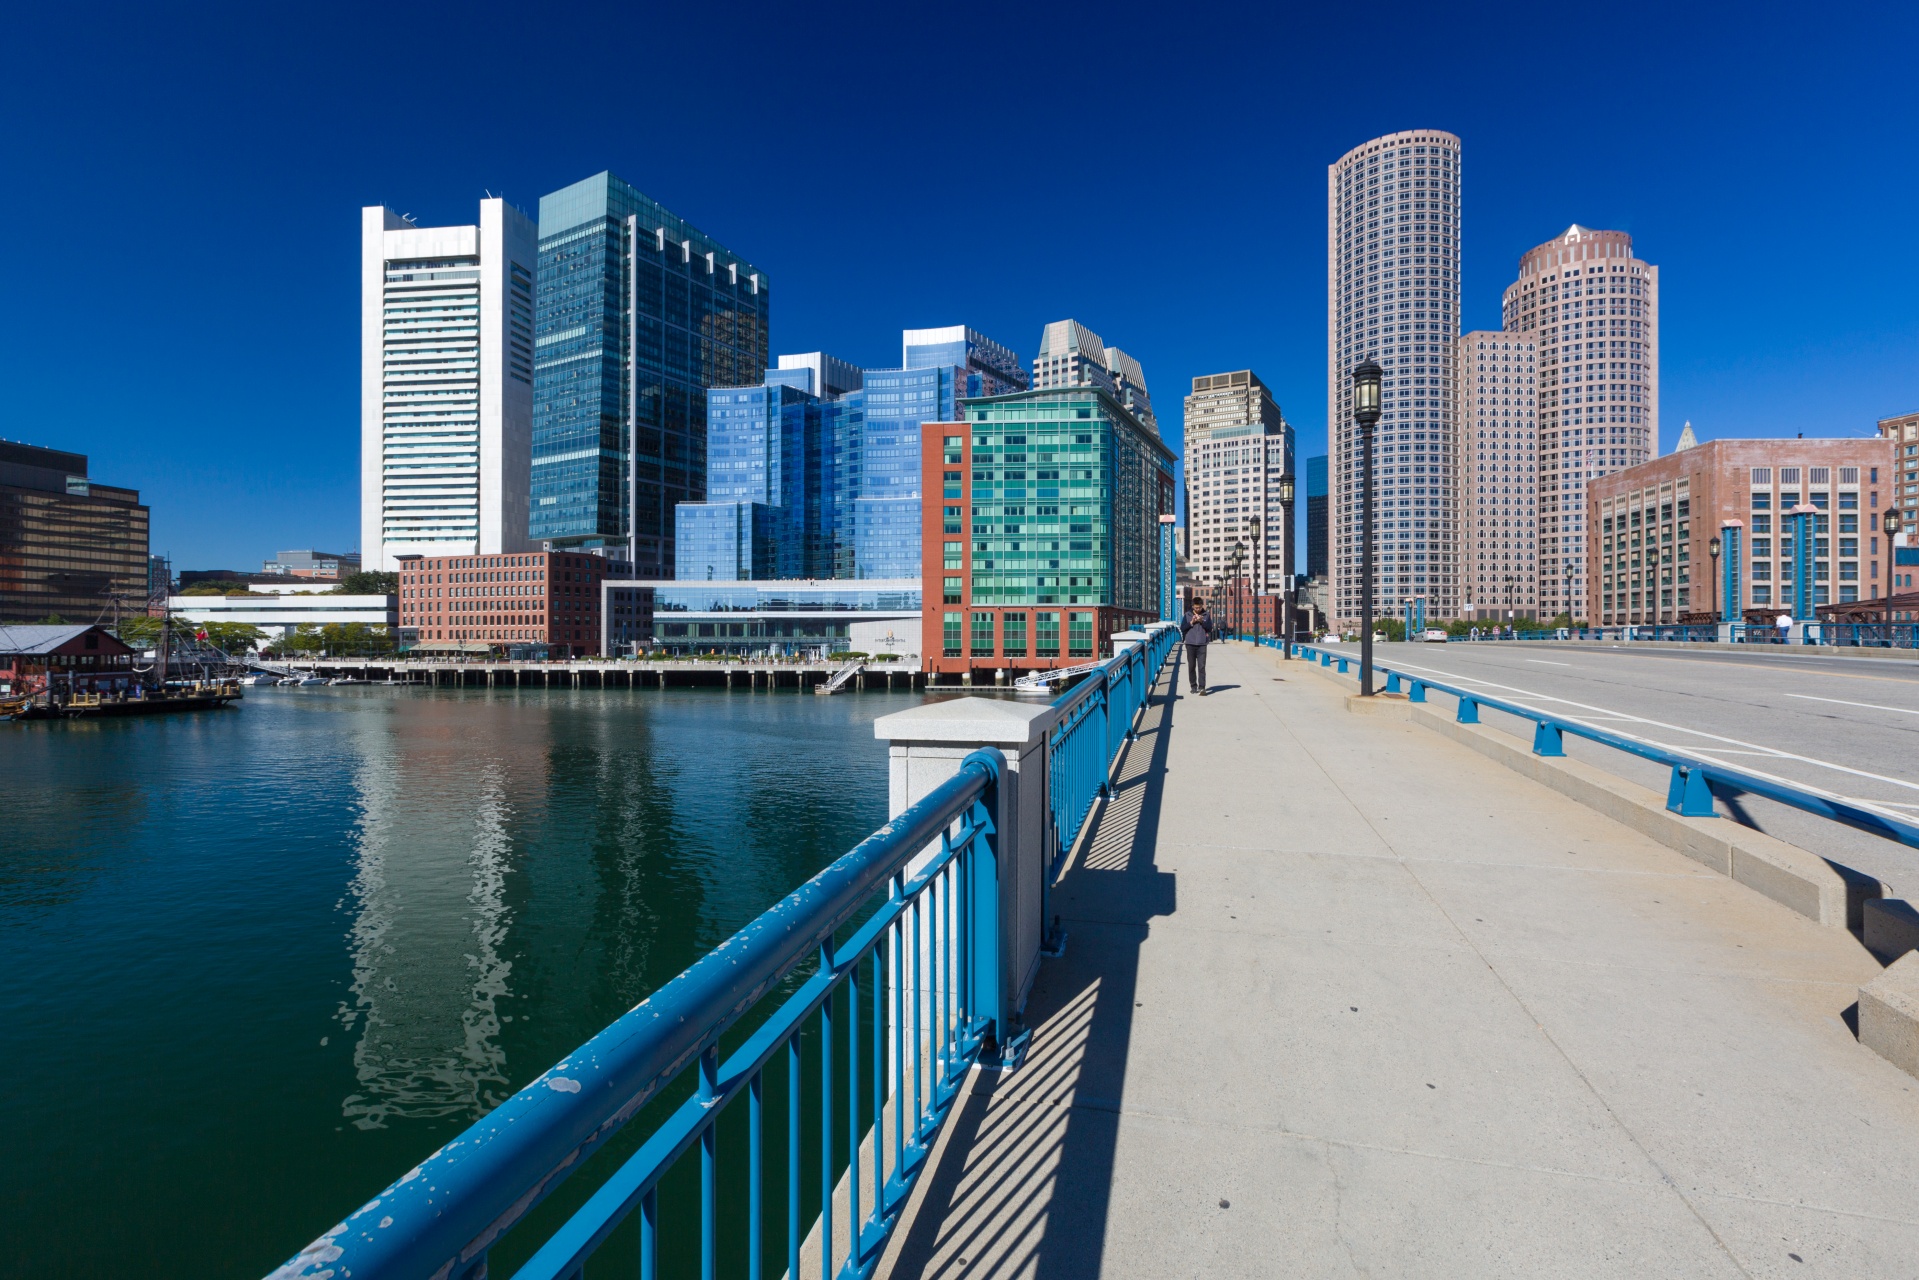   Boston:   Home of Top Colleges, Hospitals, Museums, Sports Teams - and Social Innovators. 